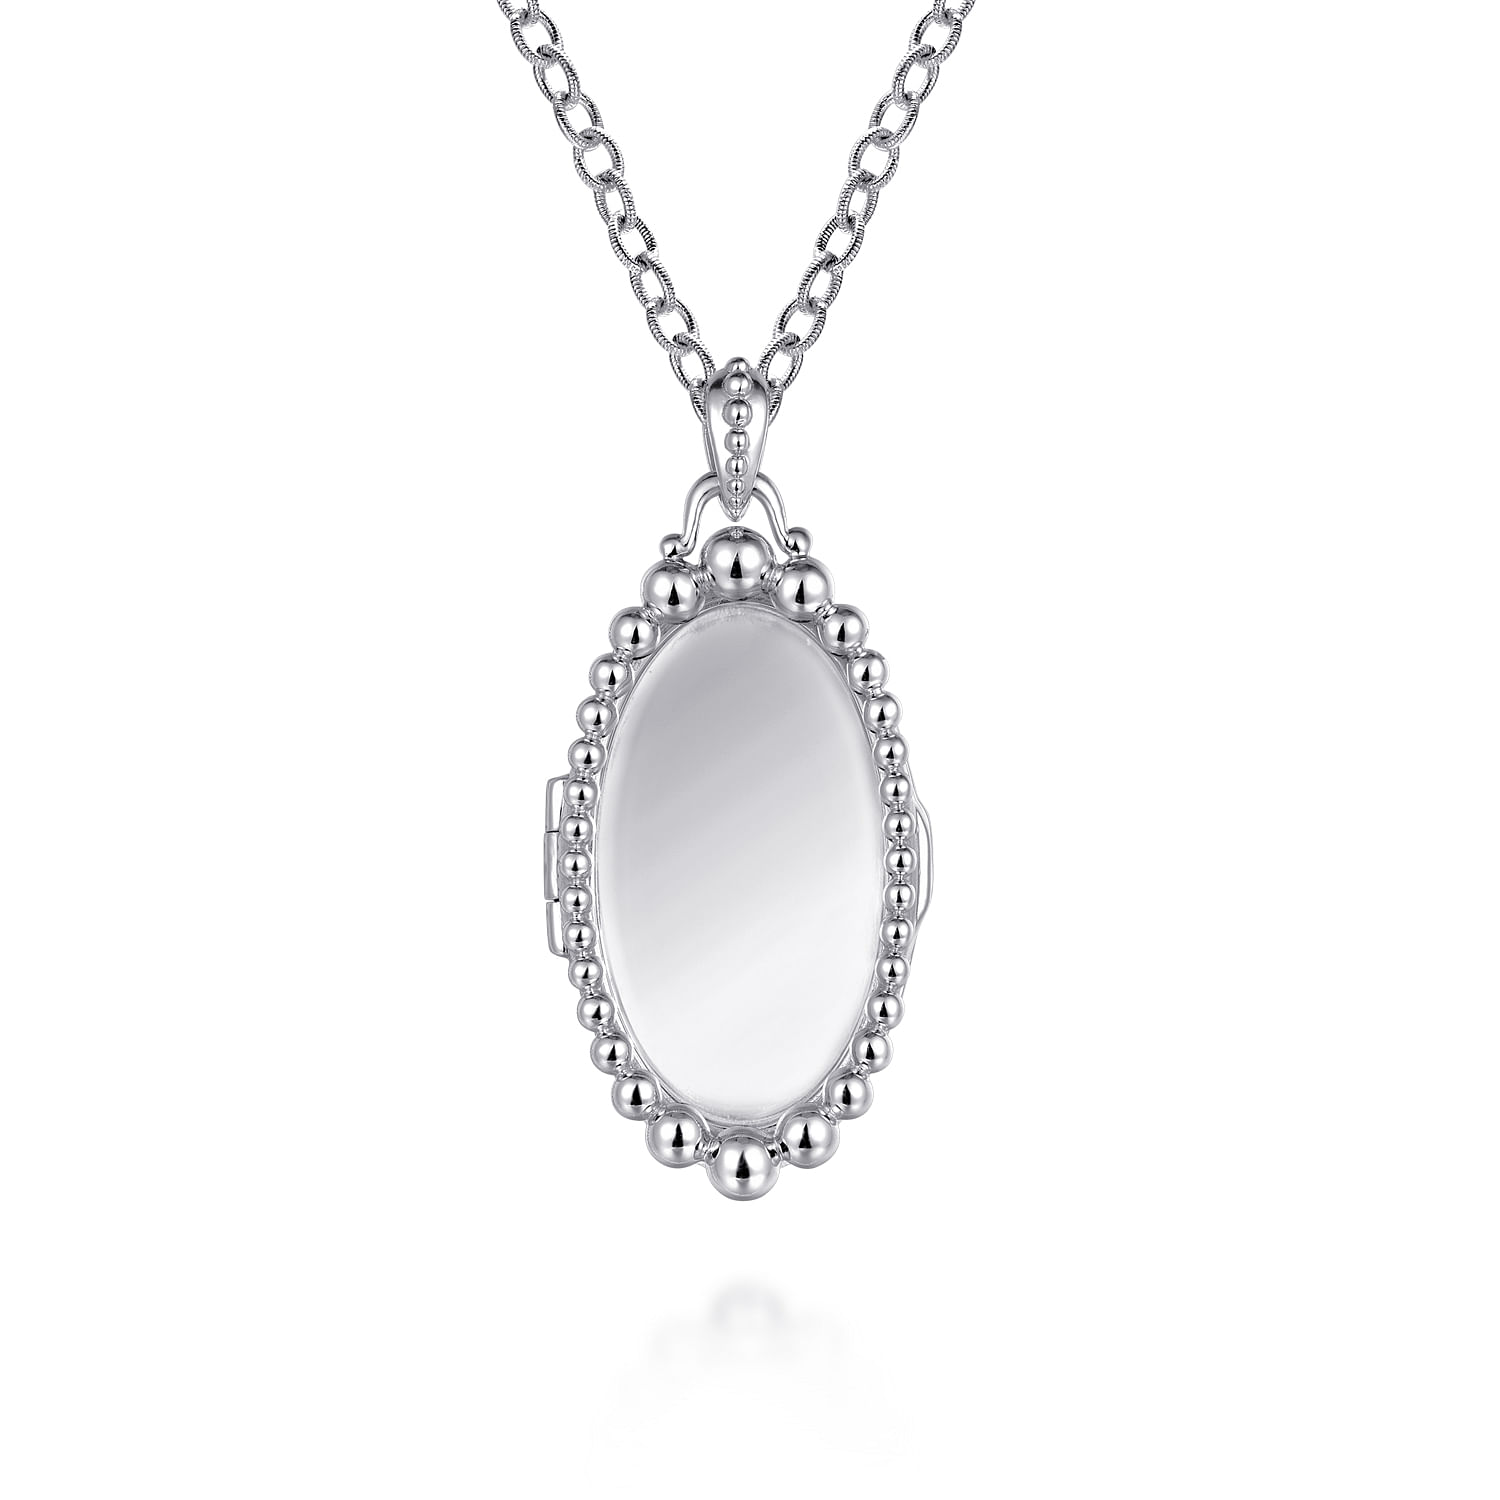 25 inch 925 Sterling Silver Beaded Glass Front Oval Locket Necklace